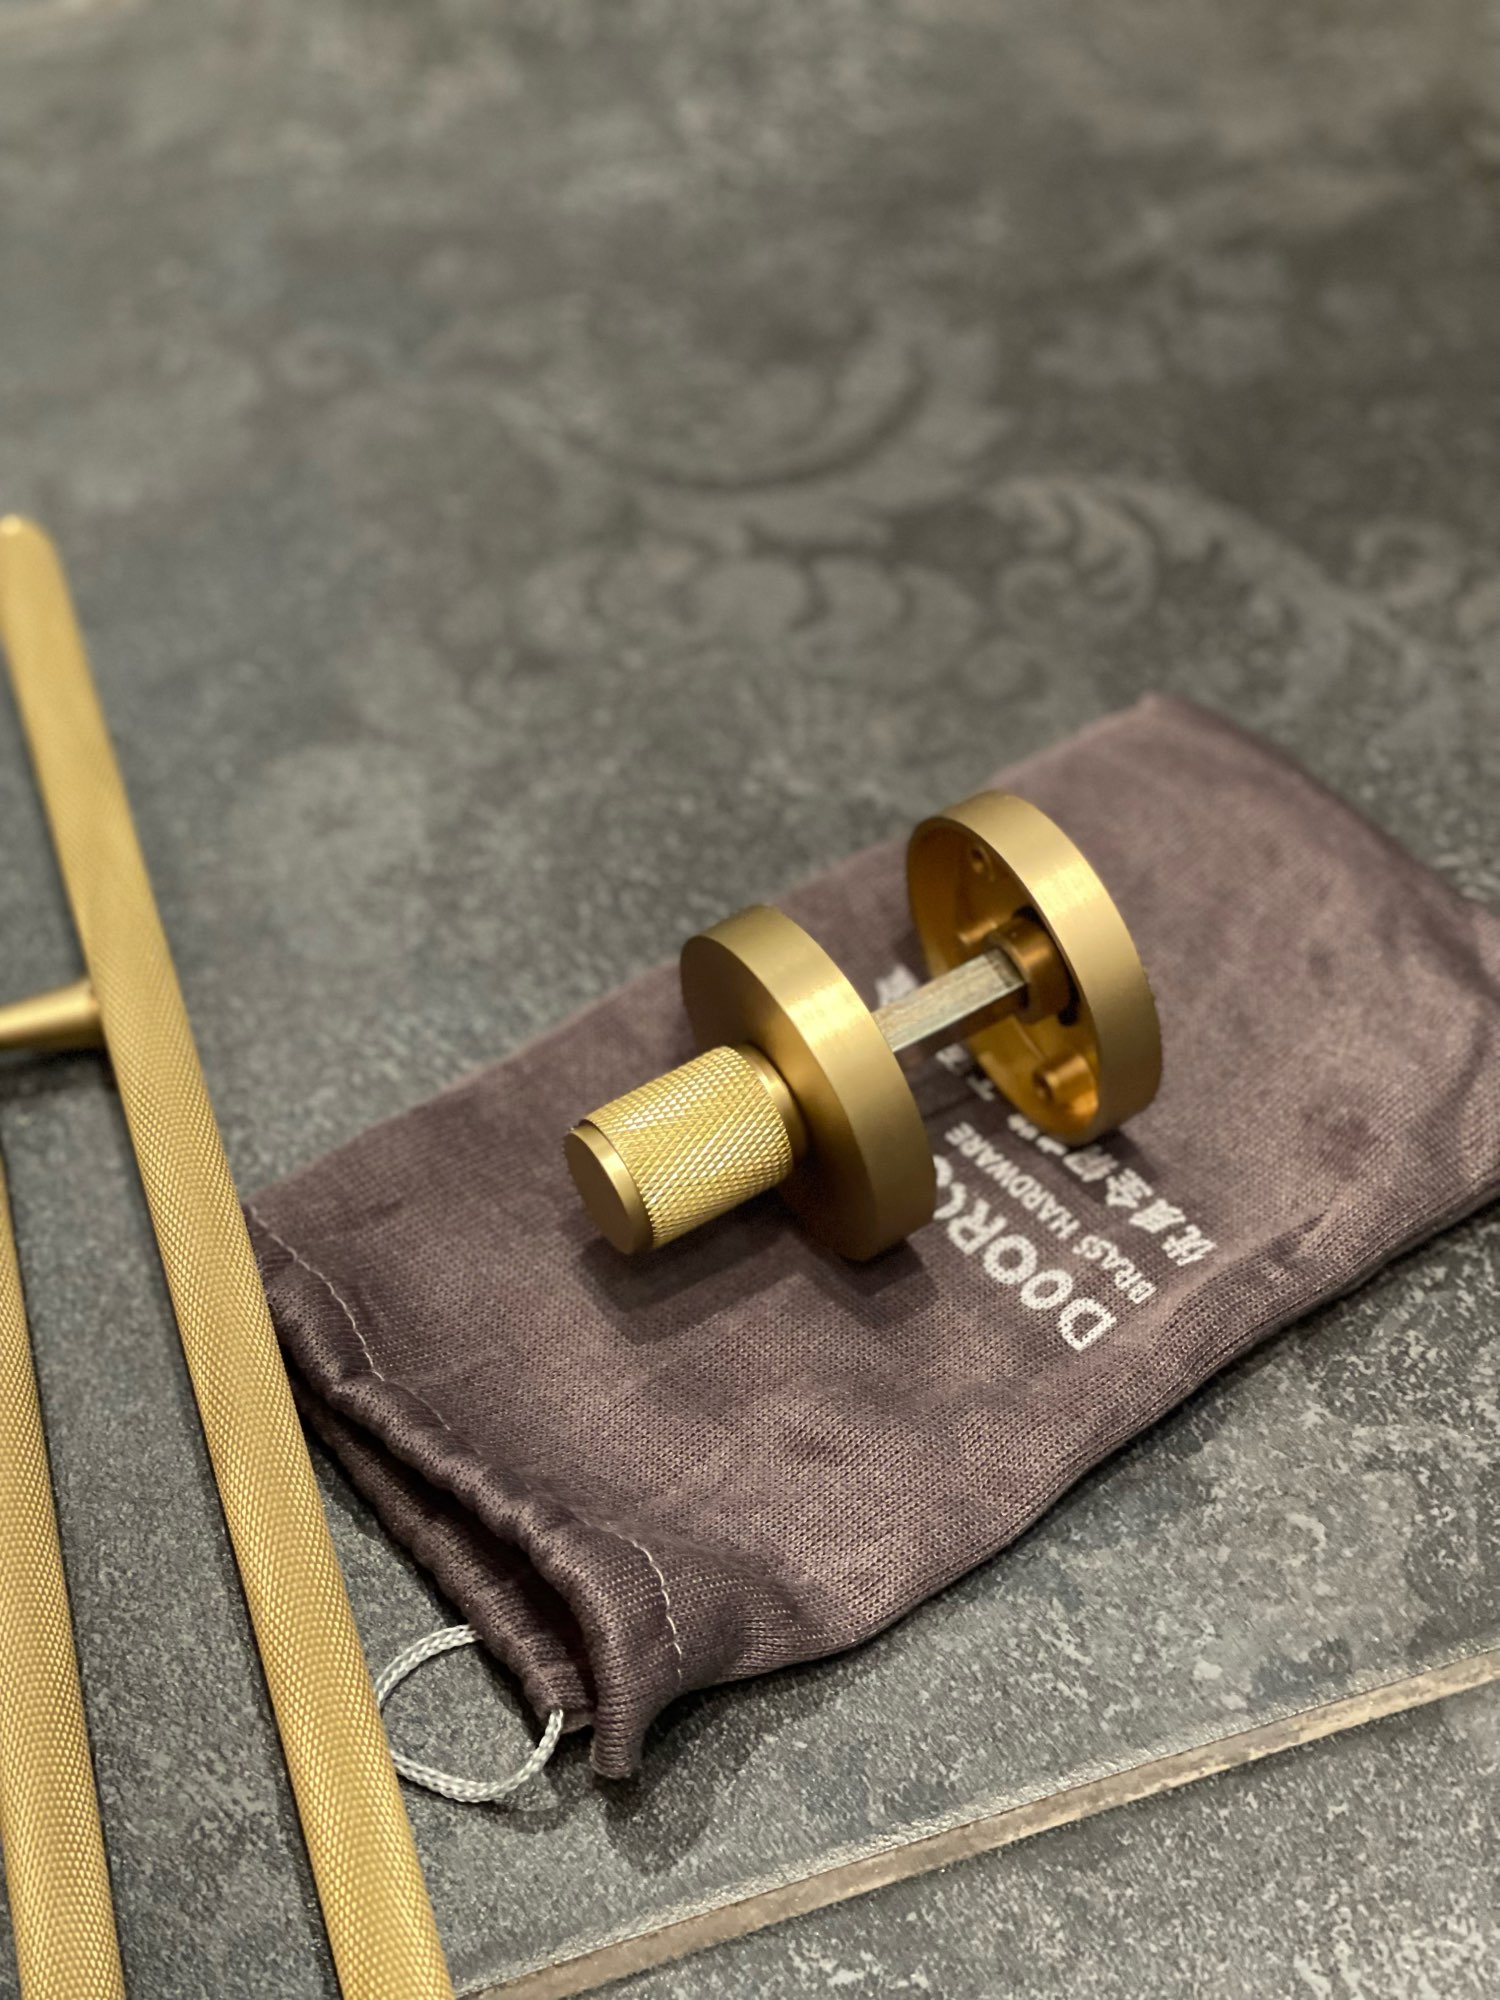 Serena Brass Knurled Door Handle - The Gold Boutique Furniture